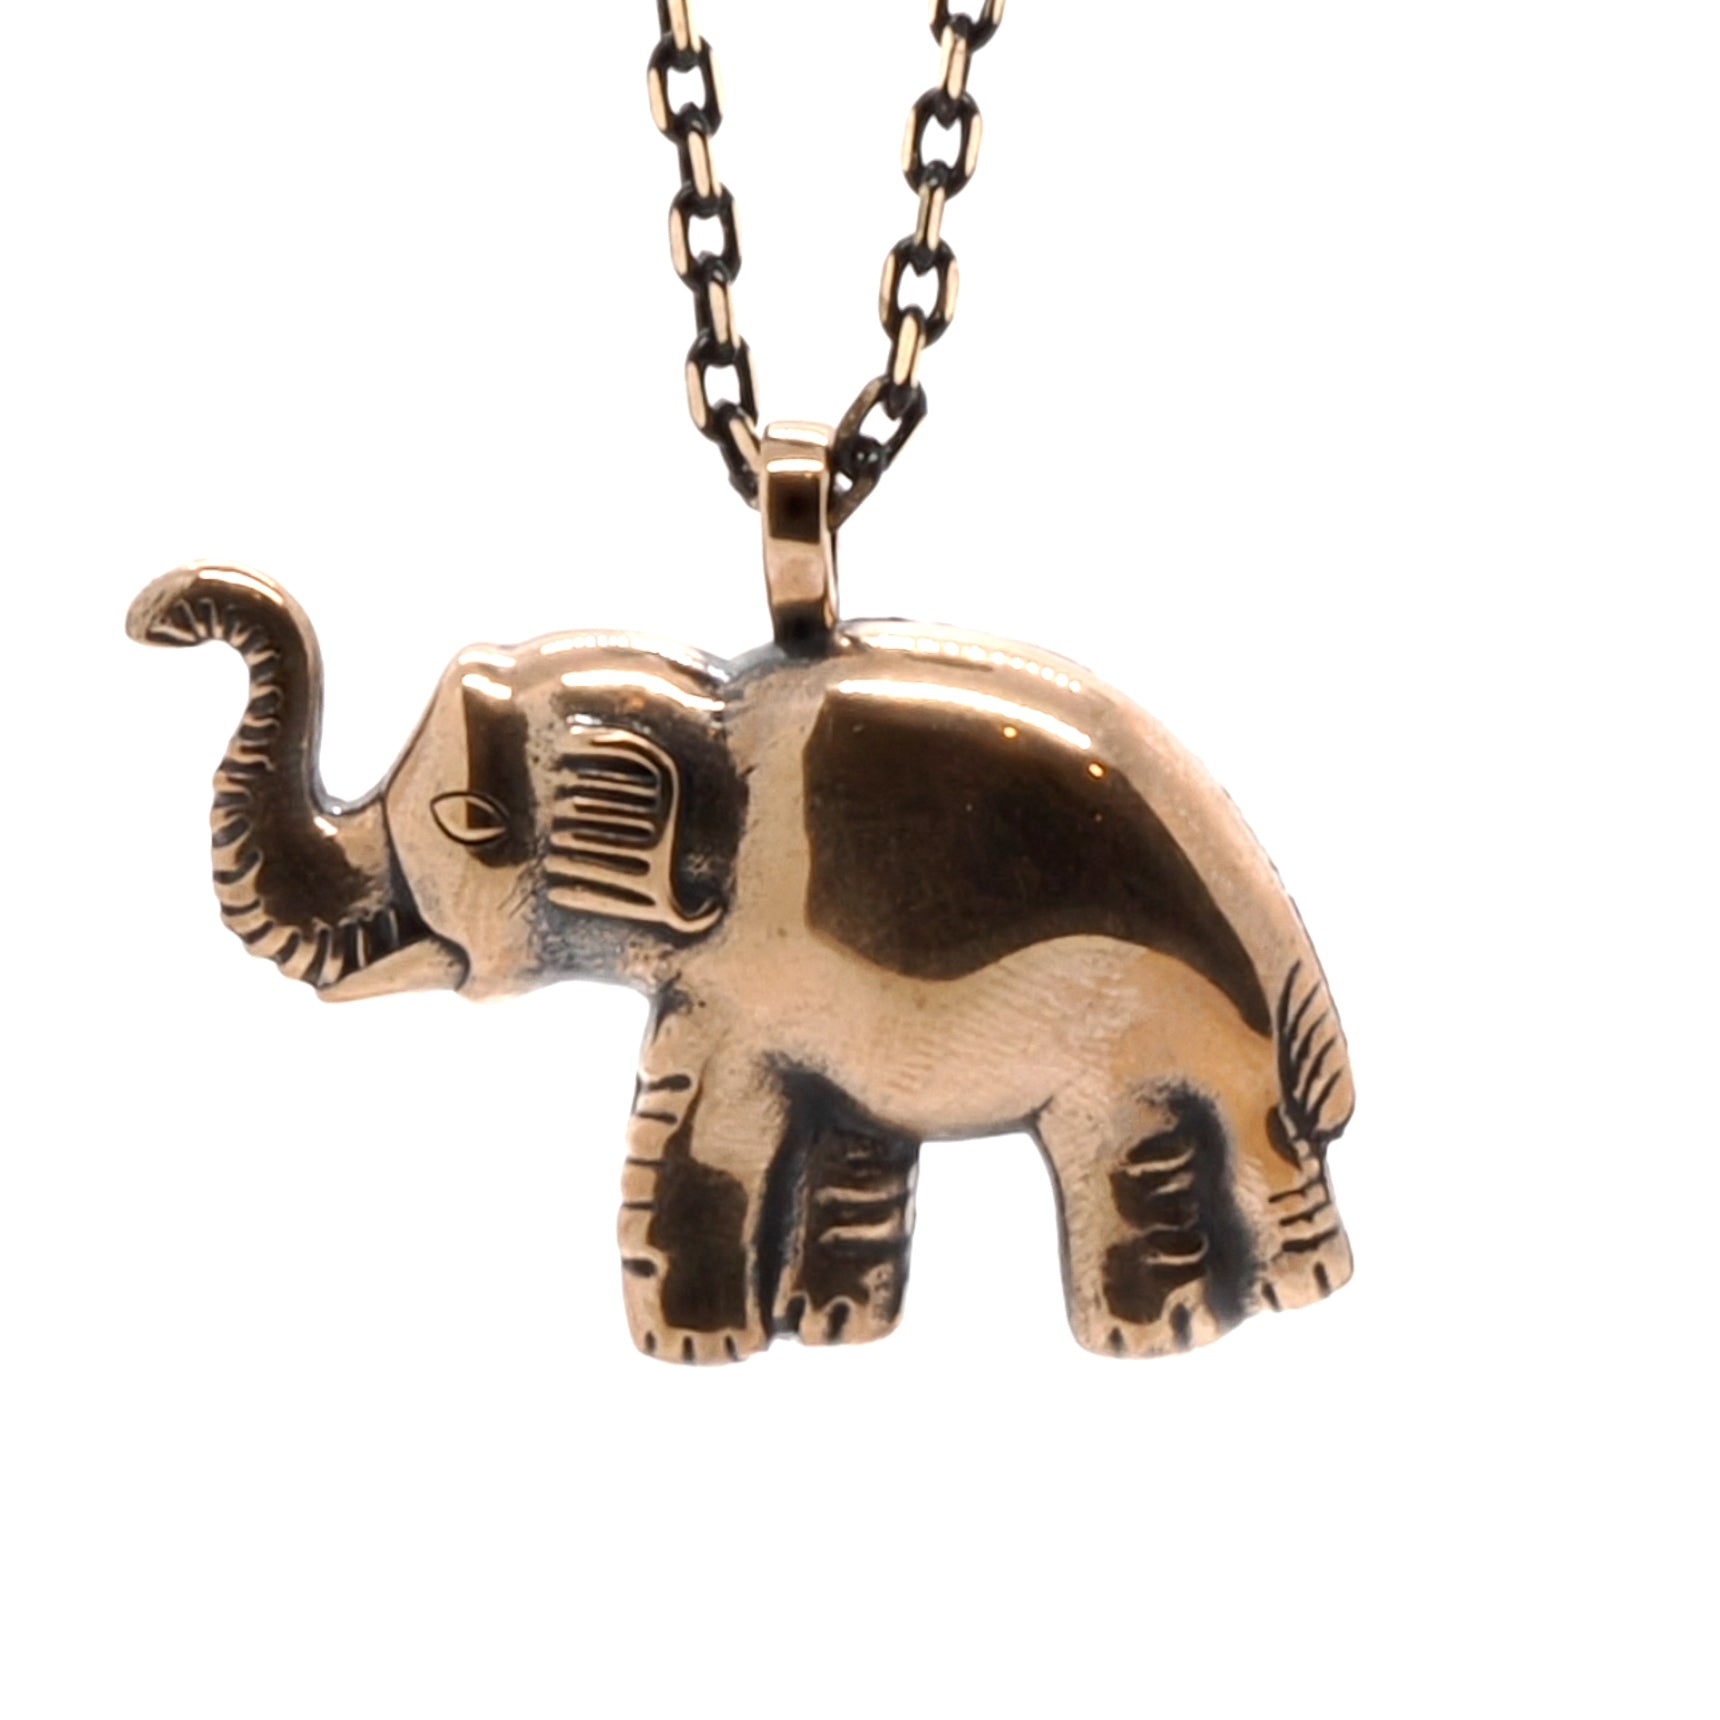 Majestic and Meaningful - The Handmade Elephant Necklace Radiates Good Luck and Positive Energy.